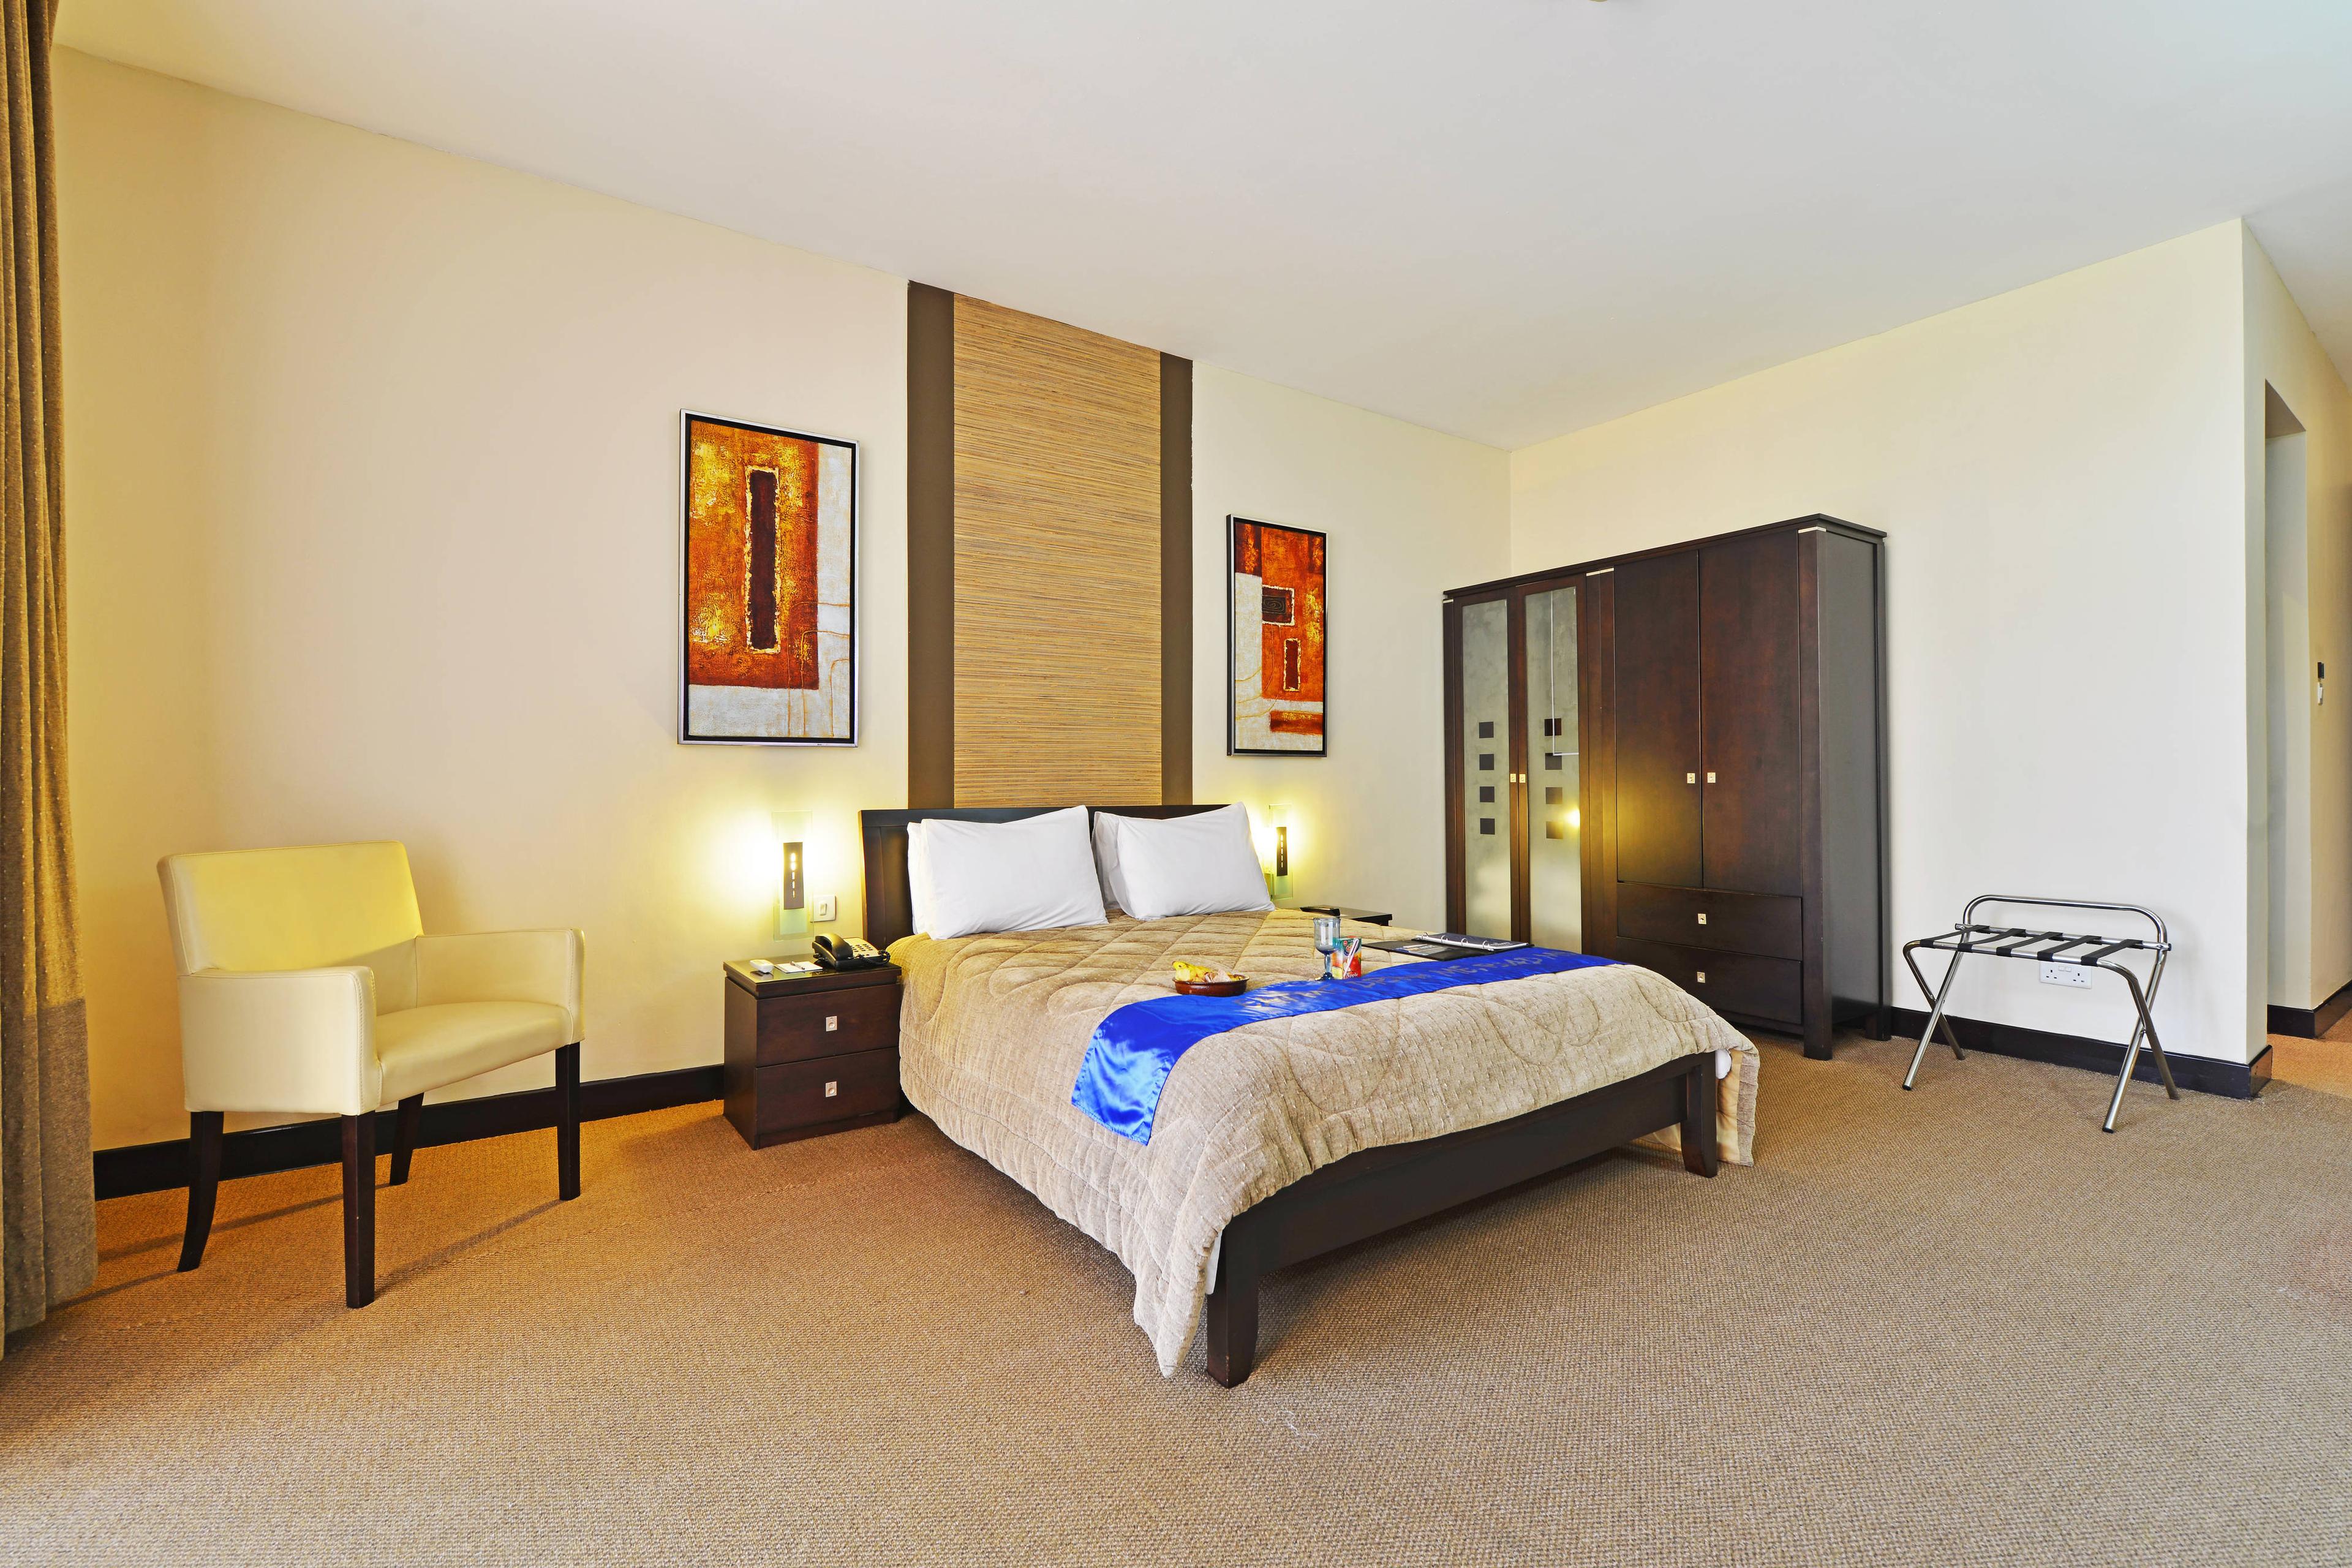 Stylish and modern standard room accommodation. We have 32 Rear Facing guest rooms.